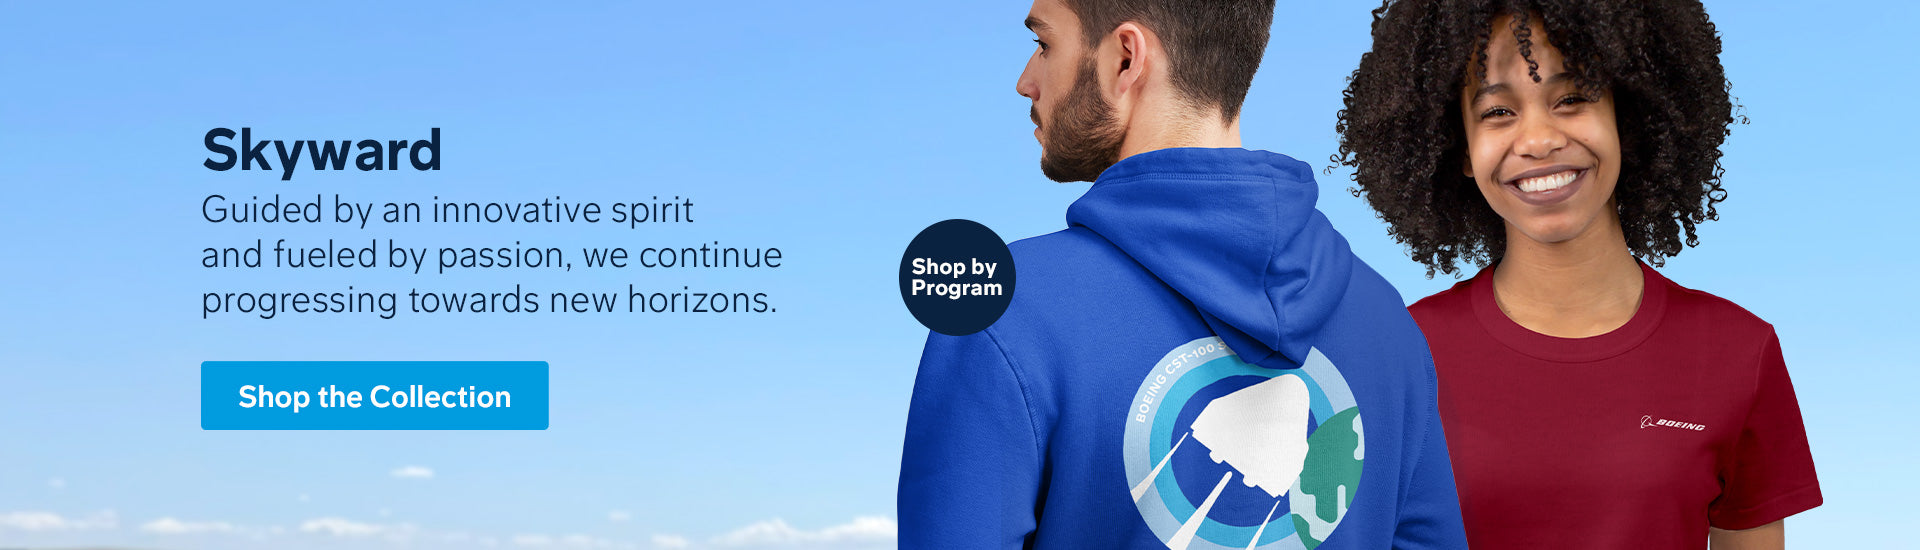 Skyward desktop HP banner featuring man and woman wearing apparel with a blue sky background.